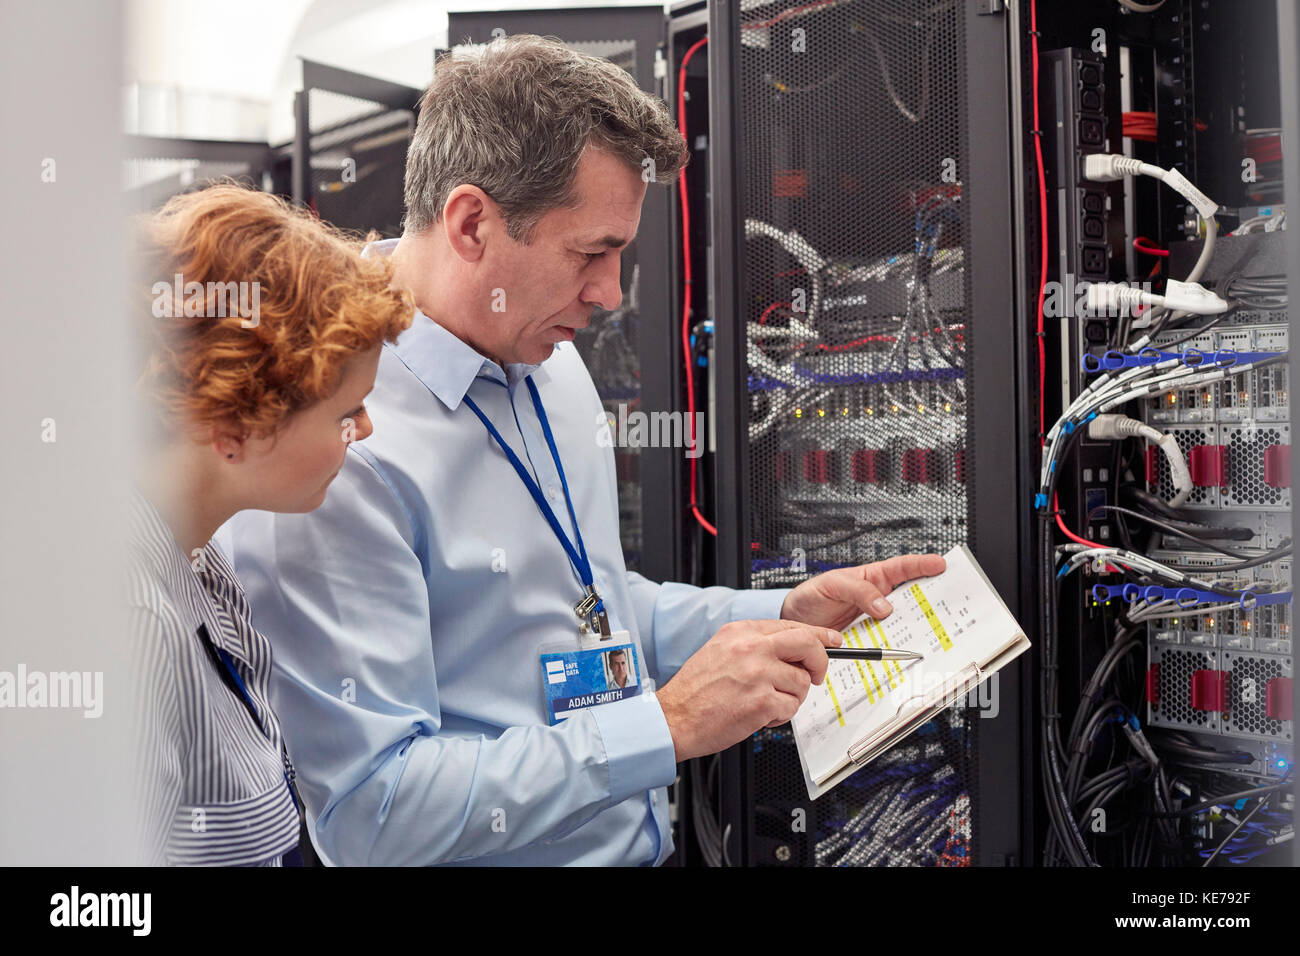 IT technicians with clipboard examining panel in server room Stock Photo